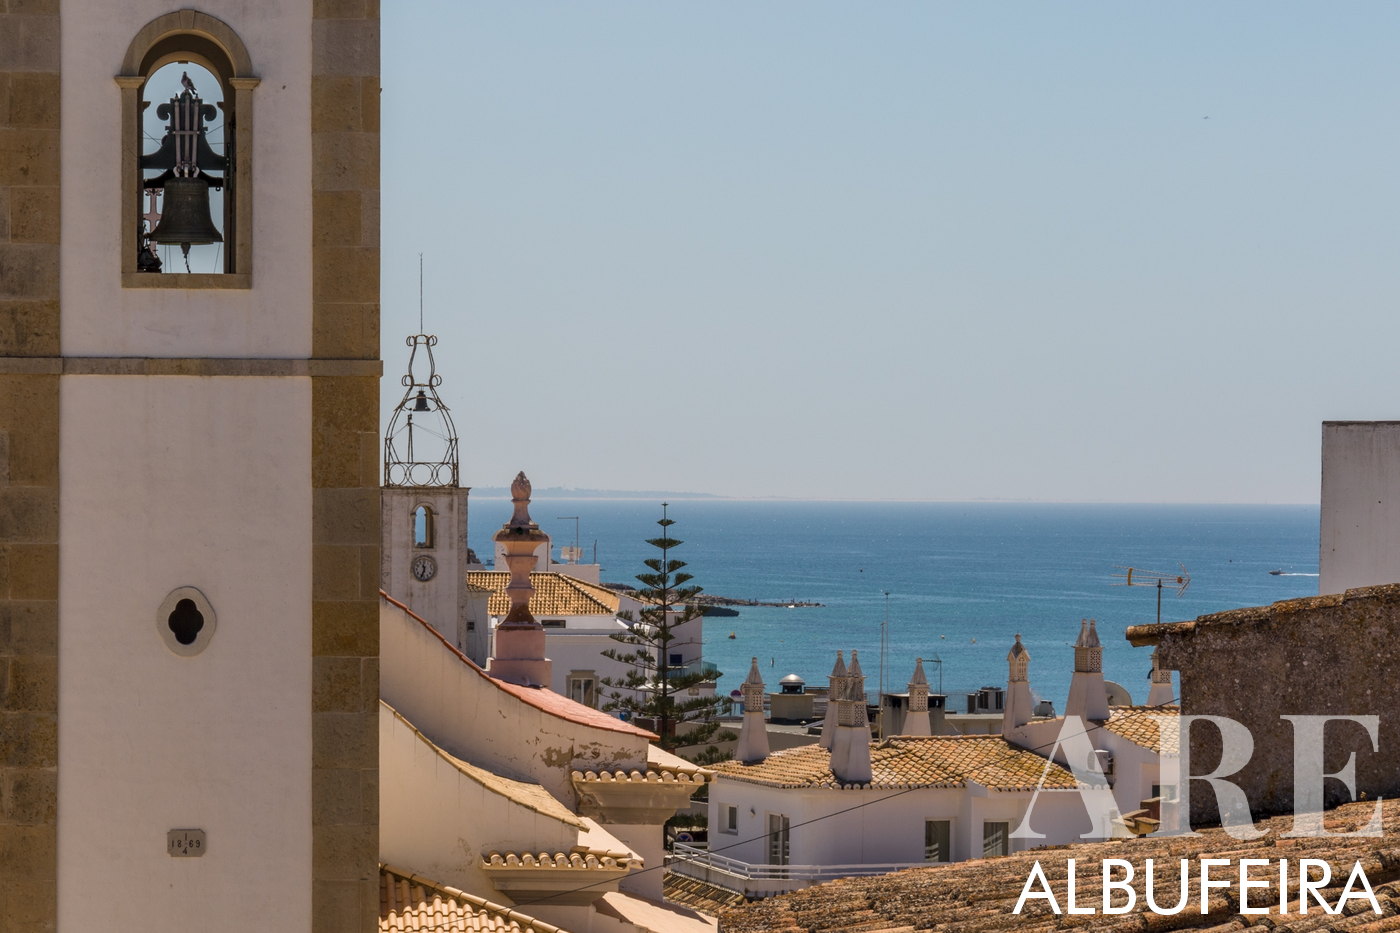 Albufeira church bell and tower majestically rising above a picturesque skyline of homes, all set against the backdrop of the expansive ocean on the horizon.